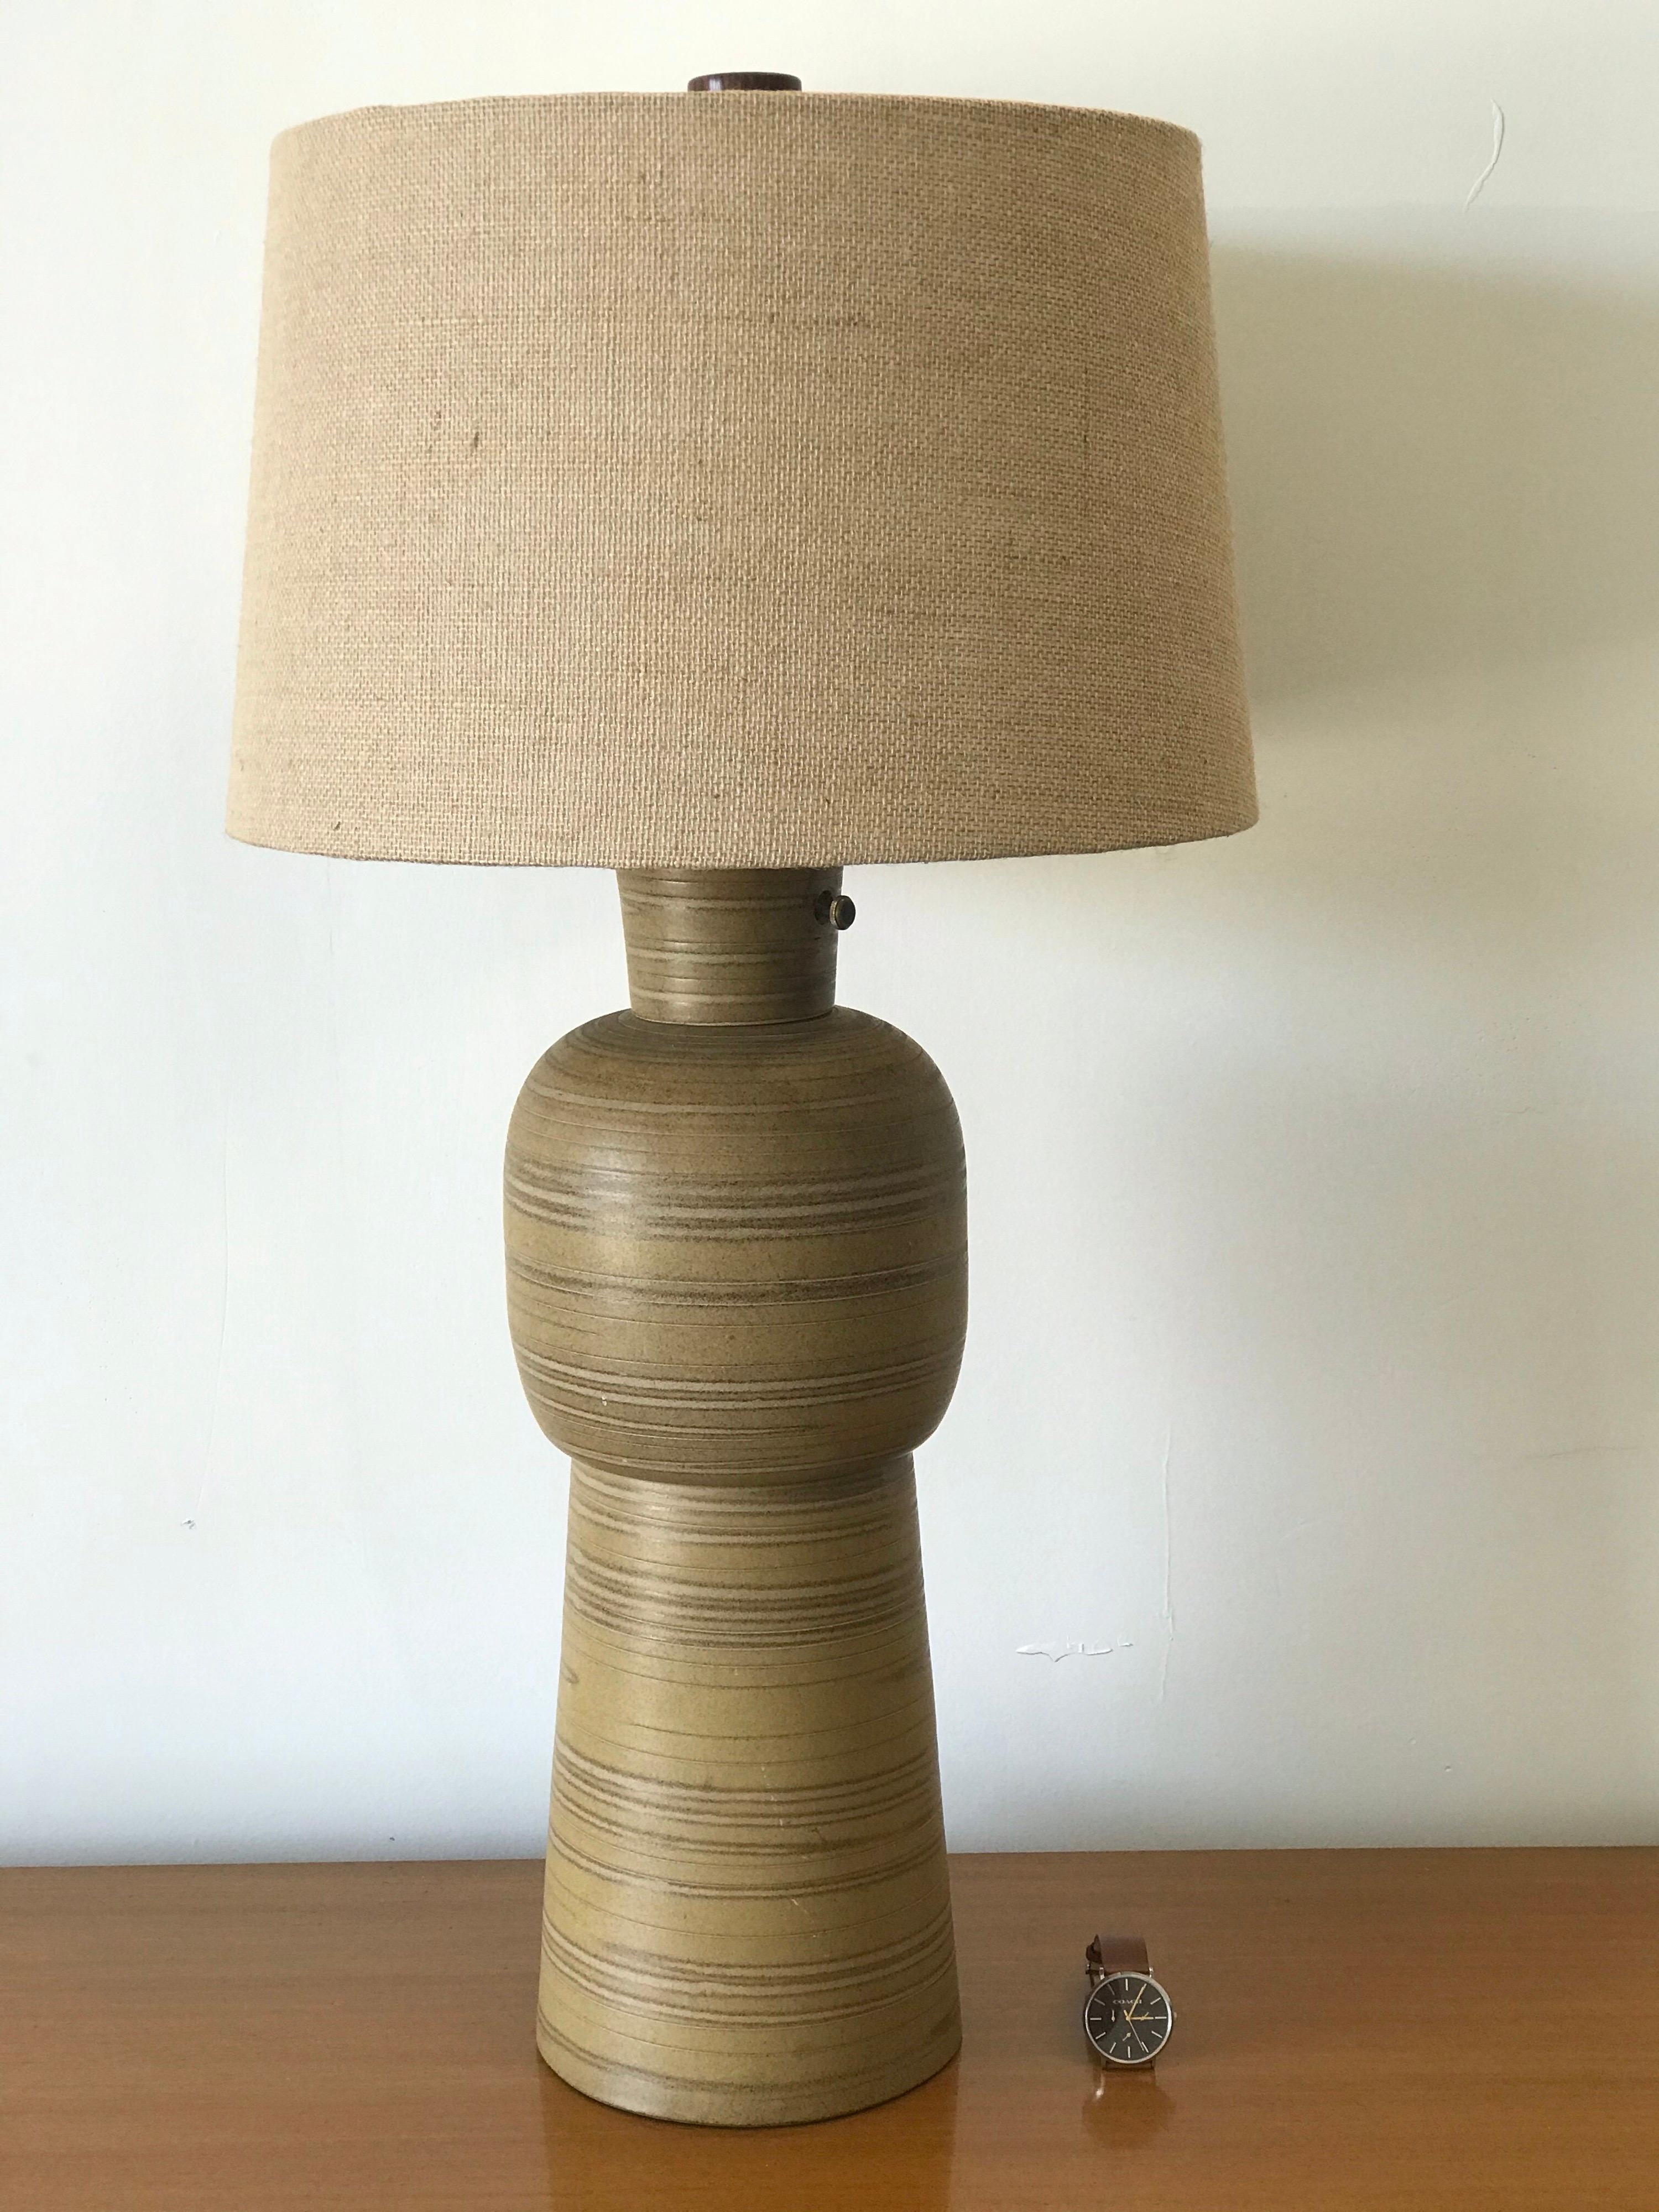 Monumental table lamp by ceramicist duo Jane and Gordon Martz. Features a matte glaze of yellow and gold swirls. Unique design with a hole for the switch. Very good vintage condition. Shade is new and finial has been replaced with a true to original